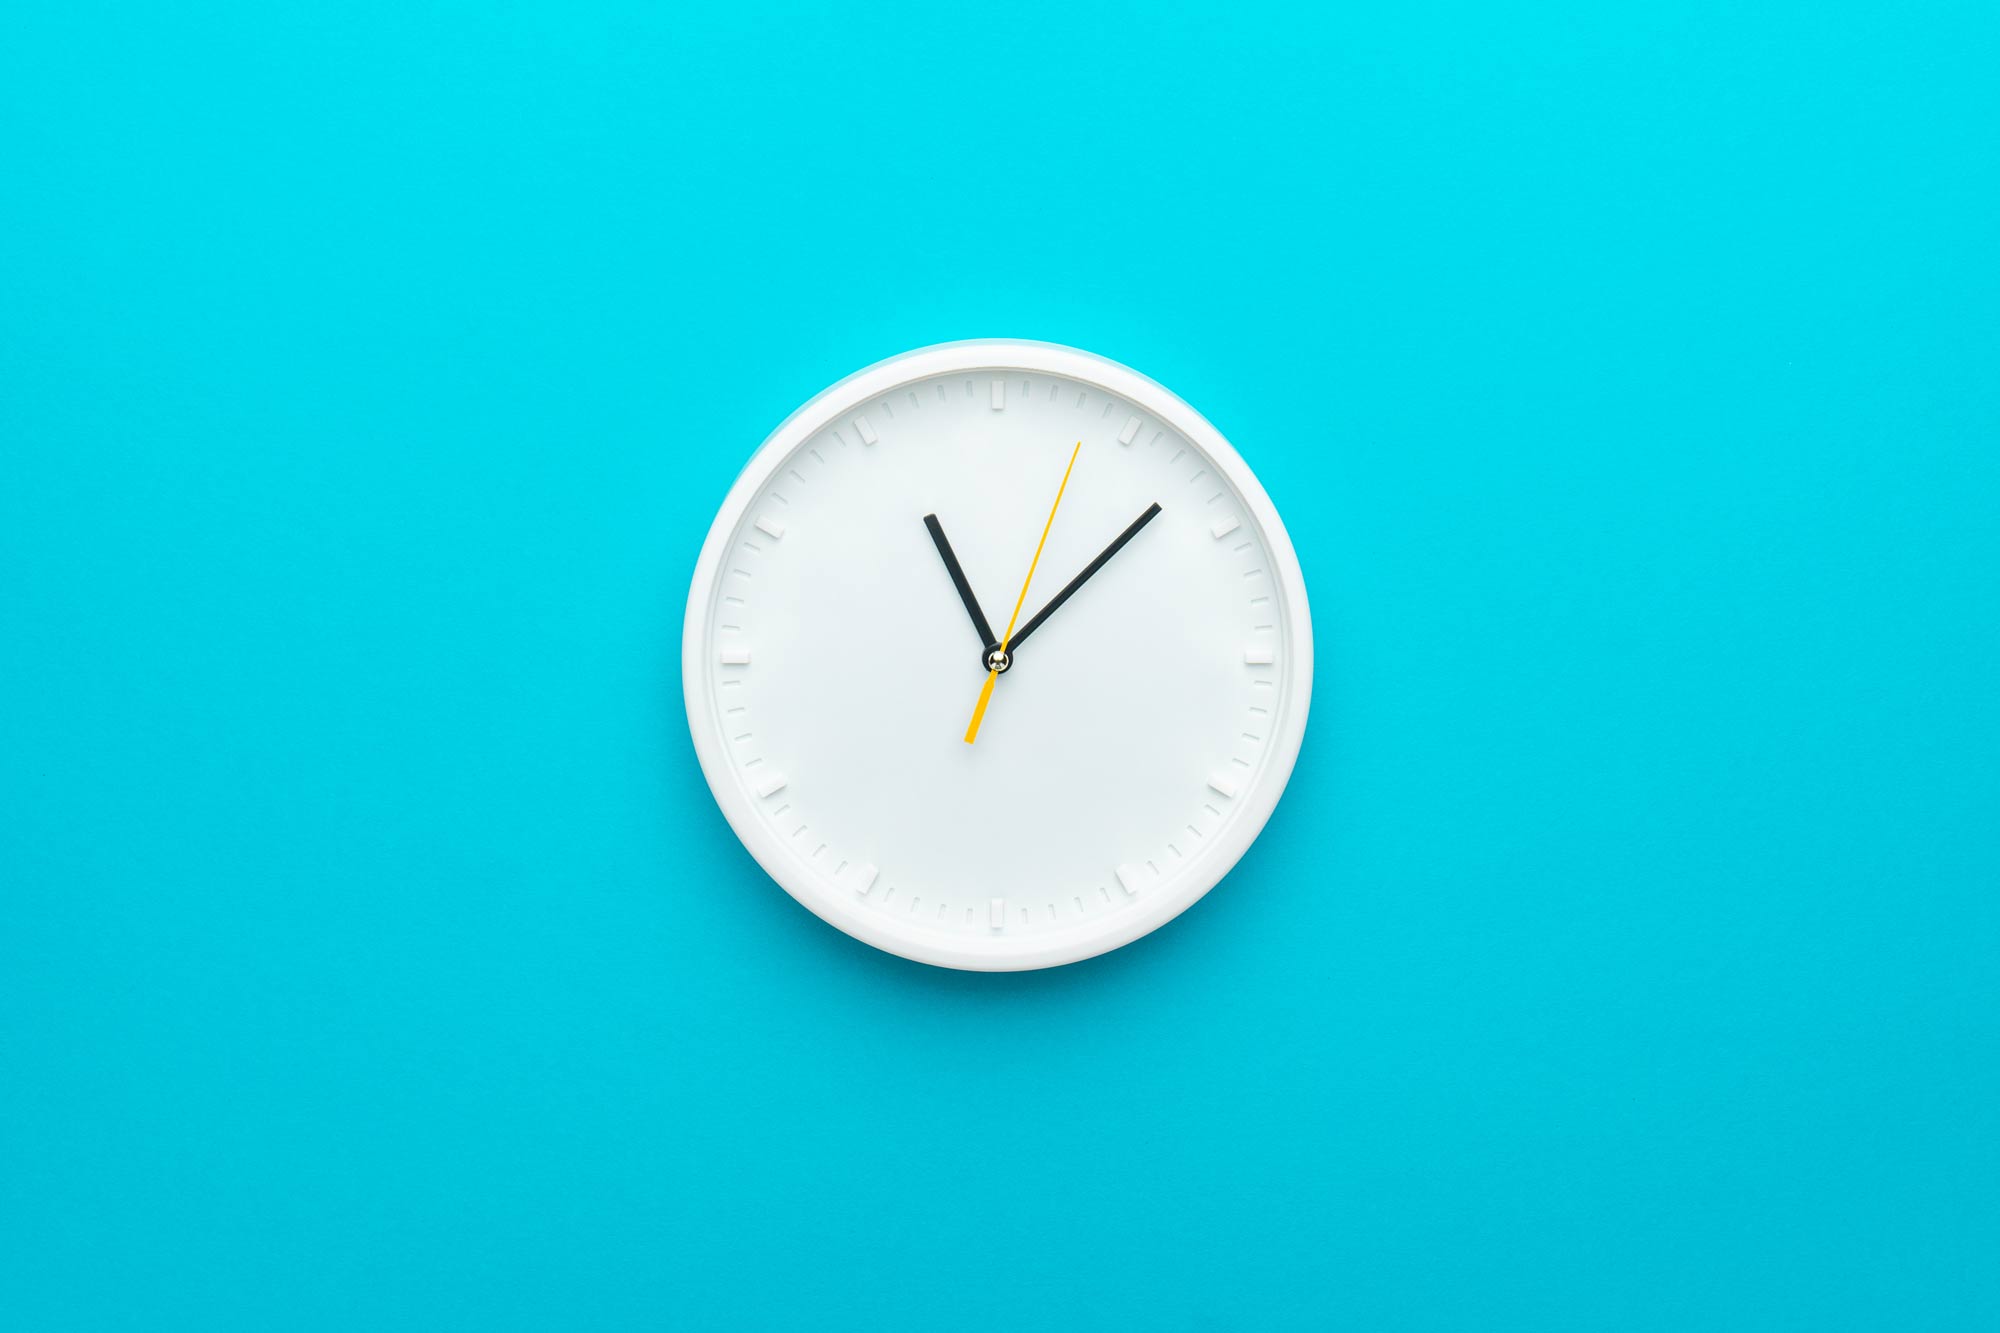 Clock hanging on blue wall